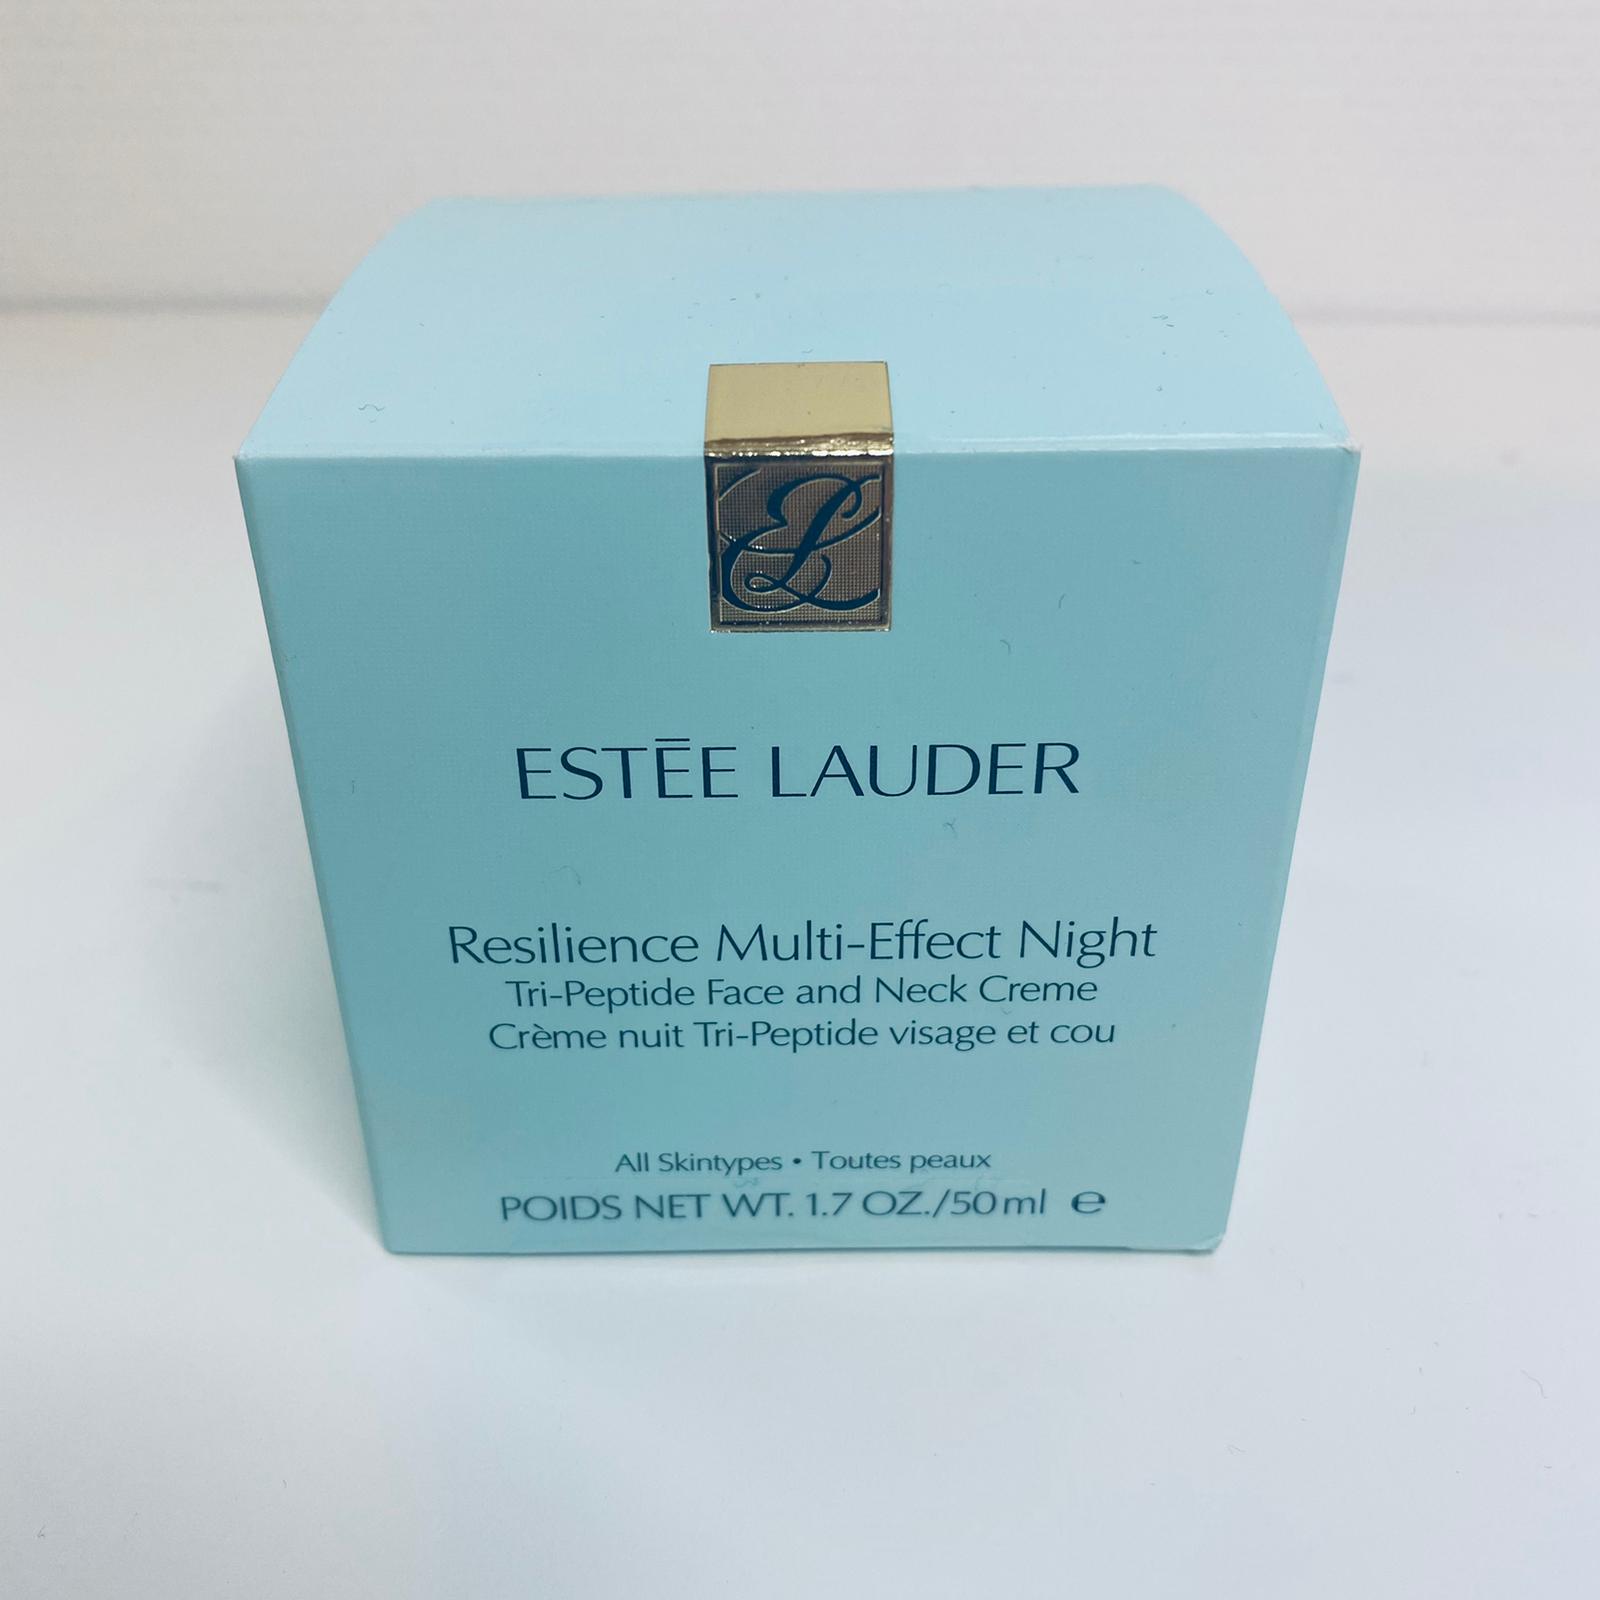 Estee Lauder resilience multi effect face and neck creme dry skin 50 ml